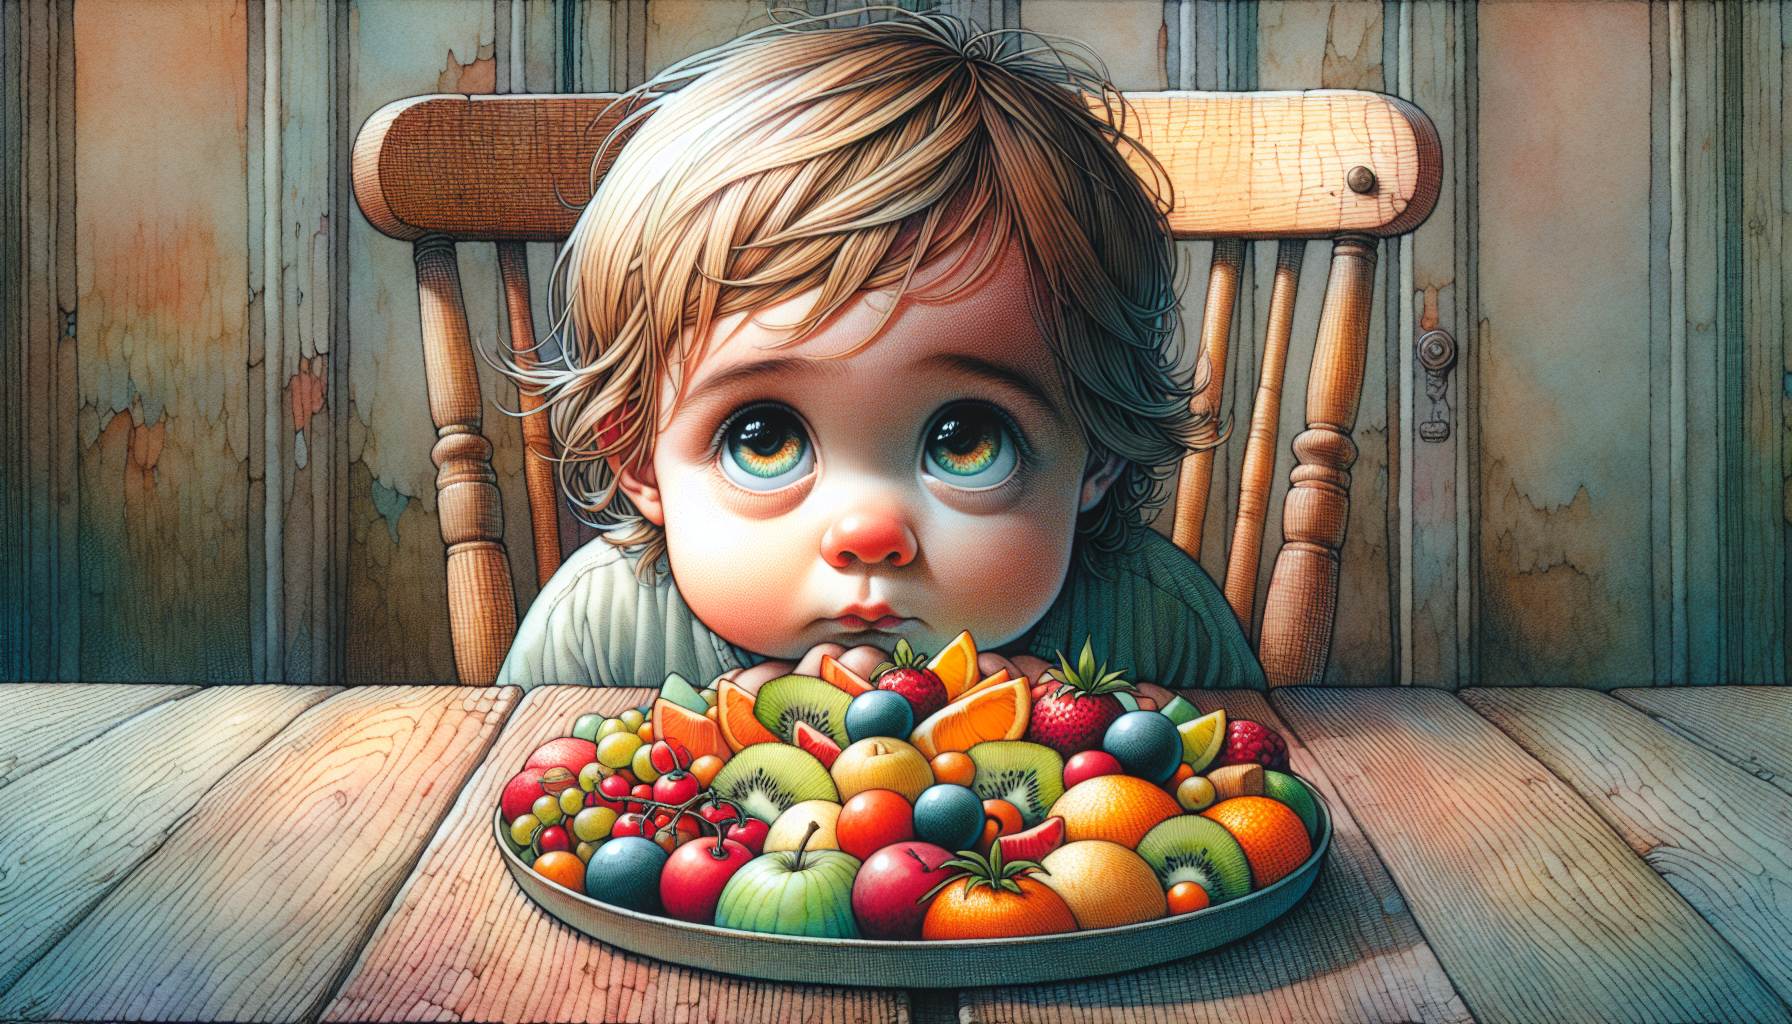 Illustration of a child with a thoughtful expression looking at a plate of food